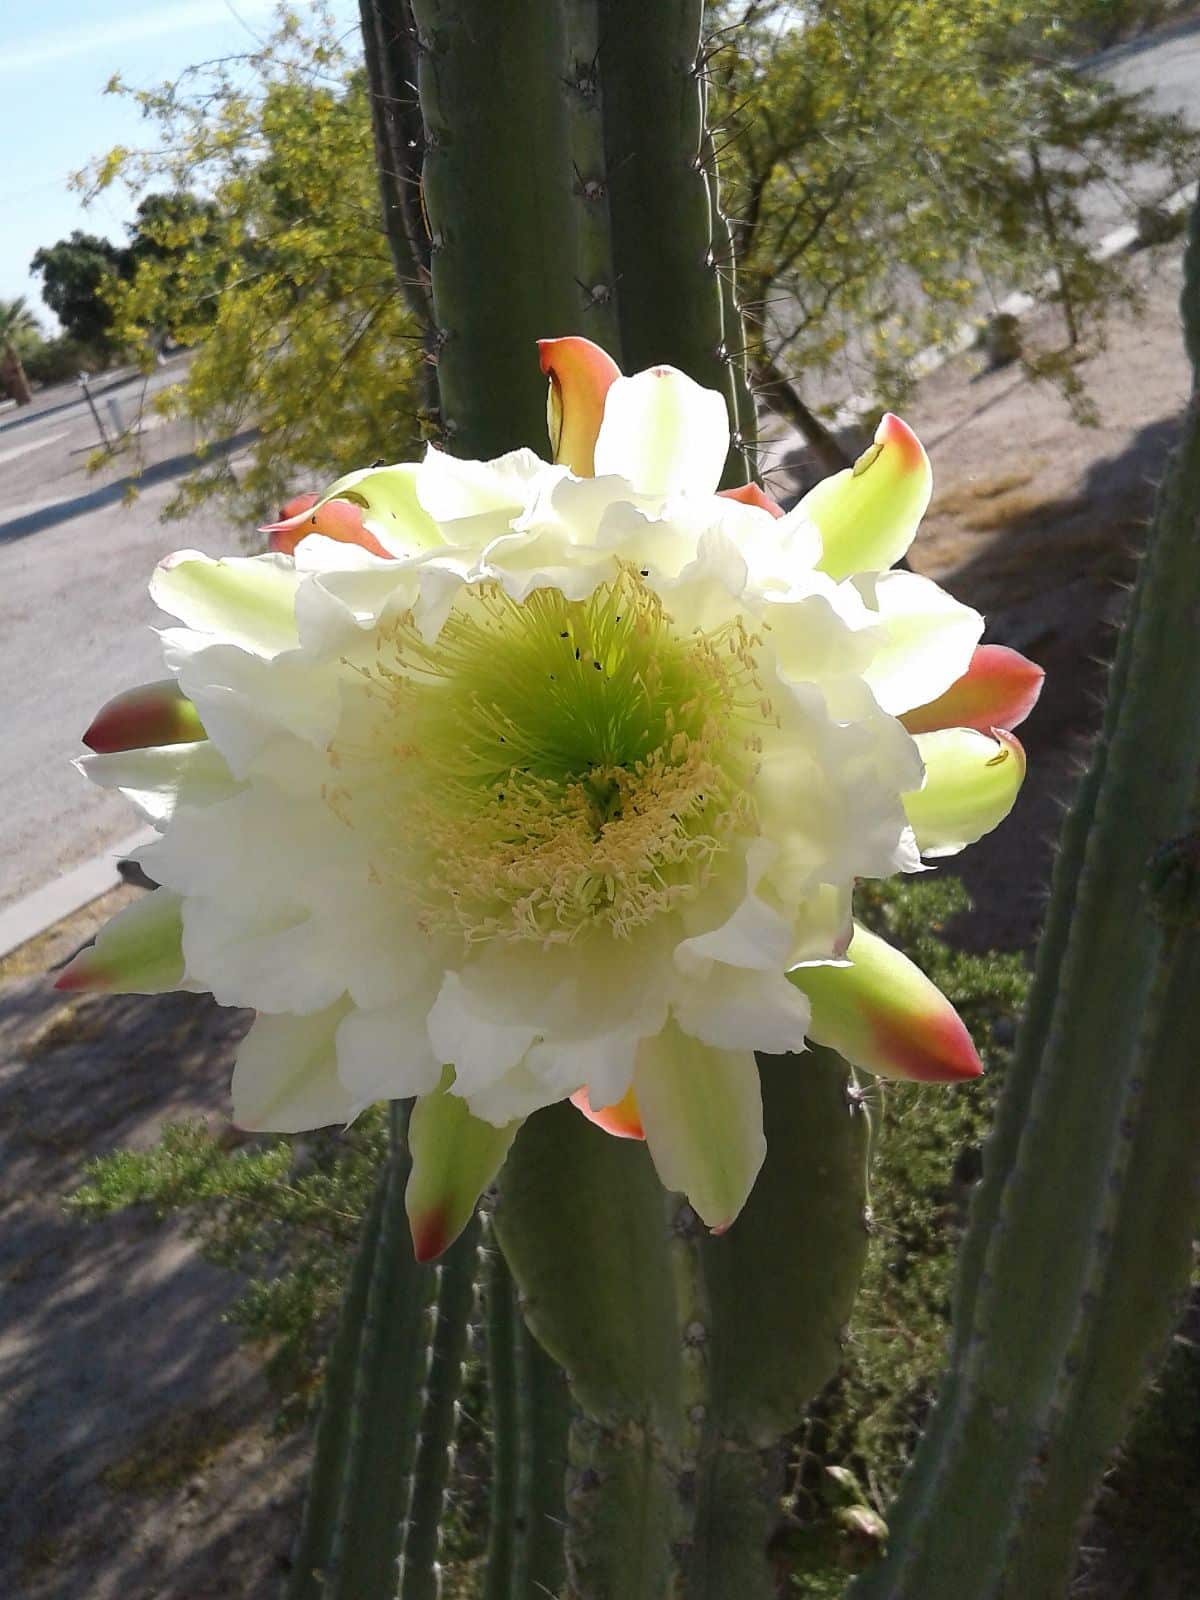 Moonlight Cactus with a white flower.